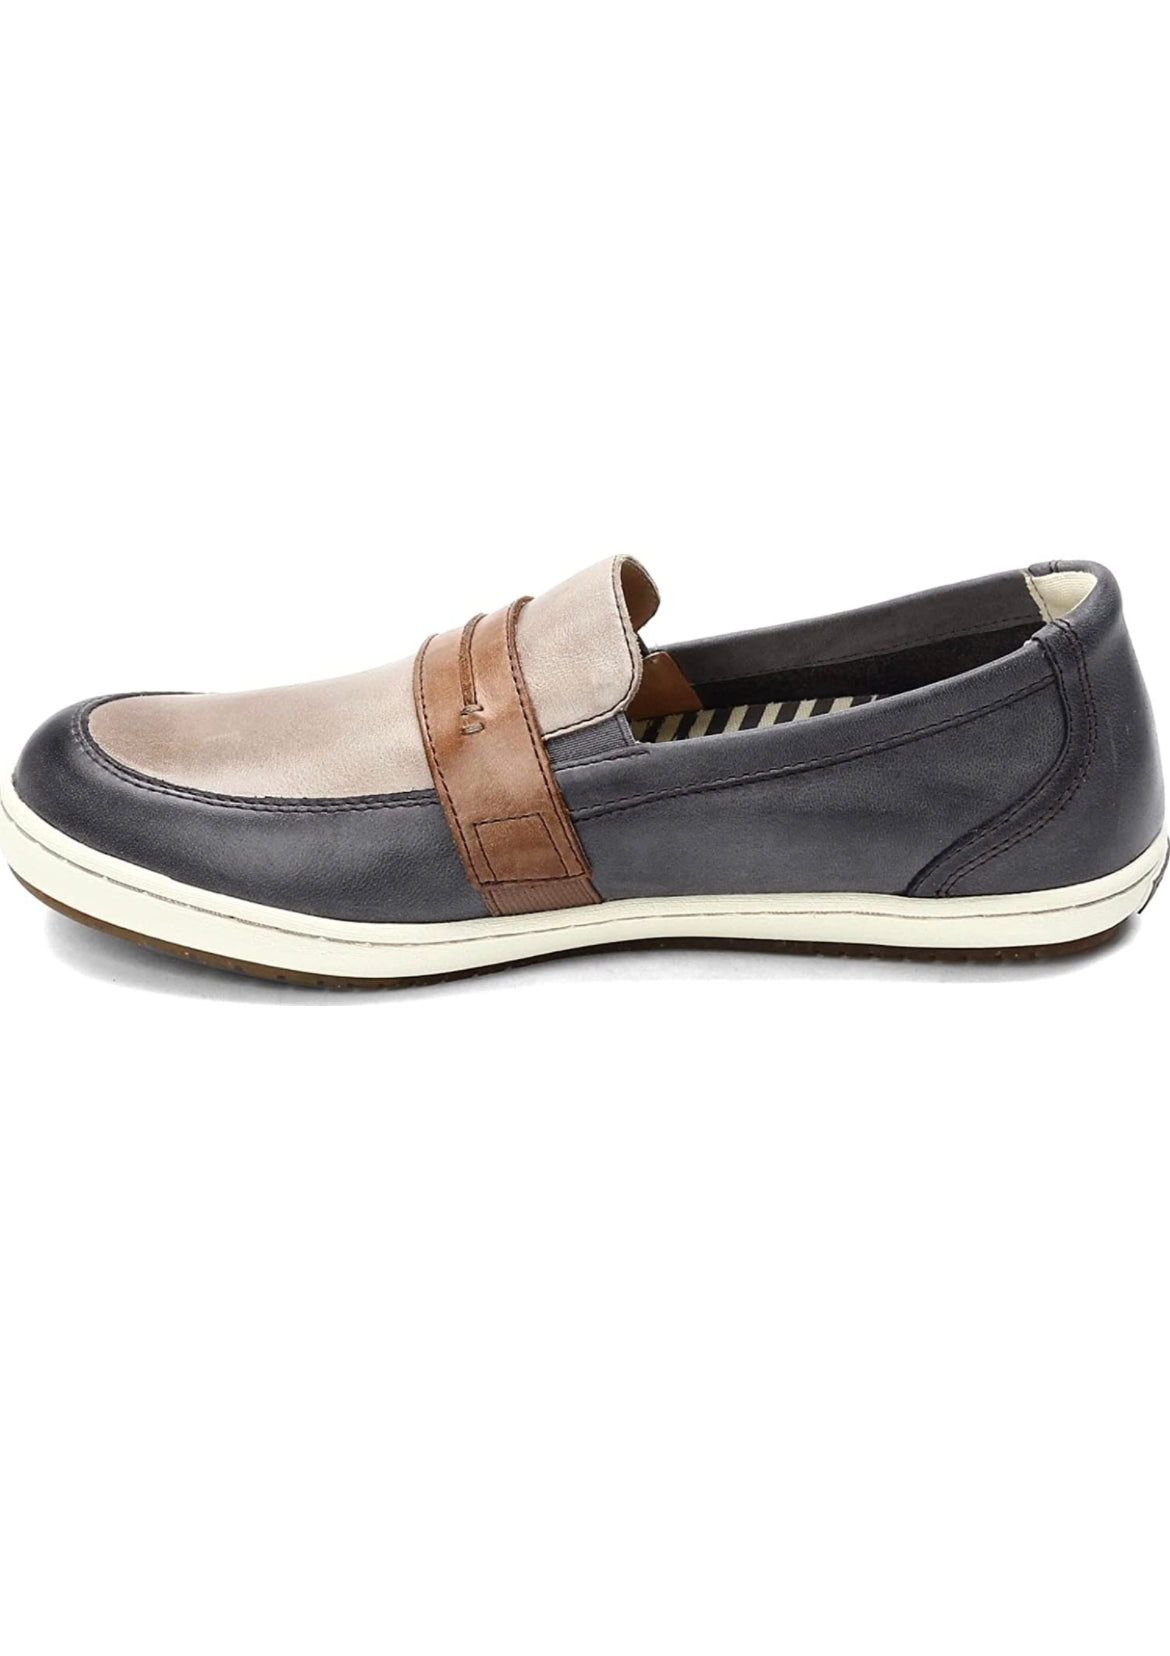 Taos Upward Steel/Taupe Women’s Shoe - All Mixed Up 